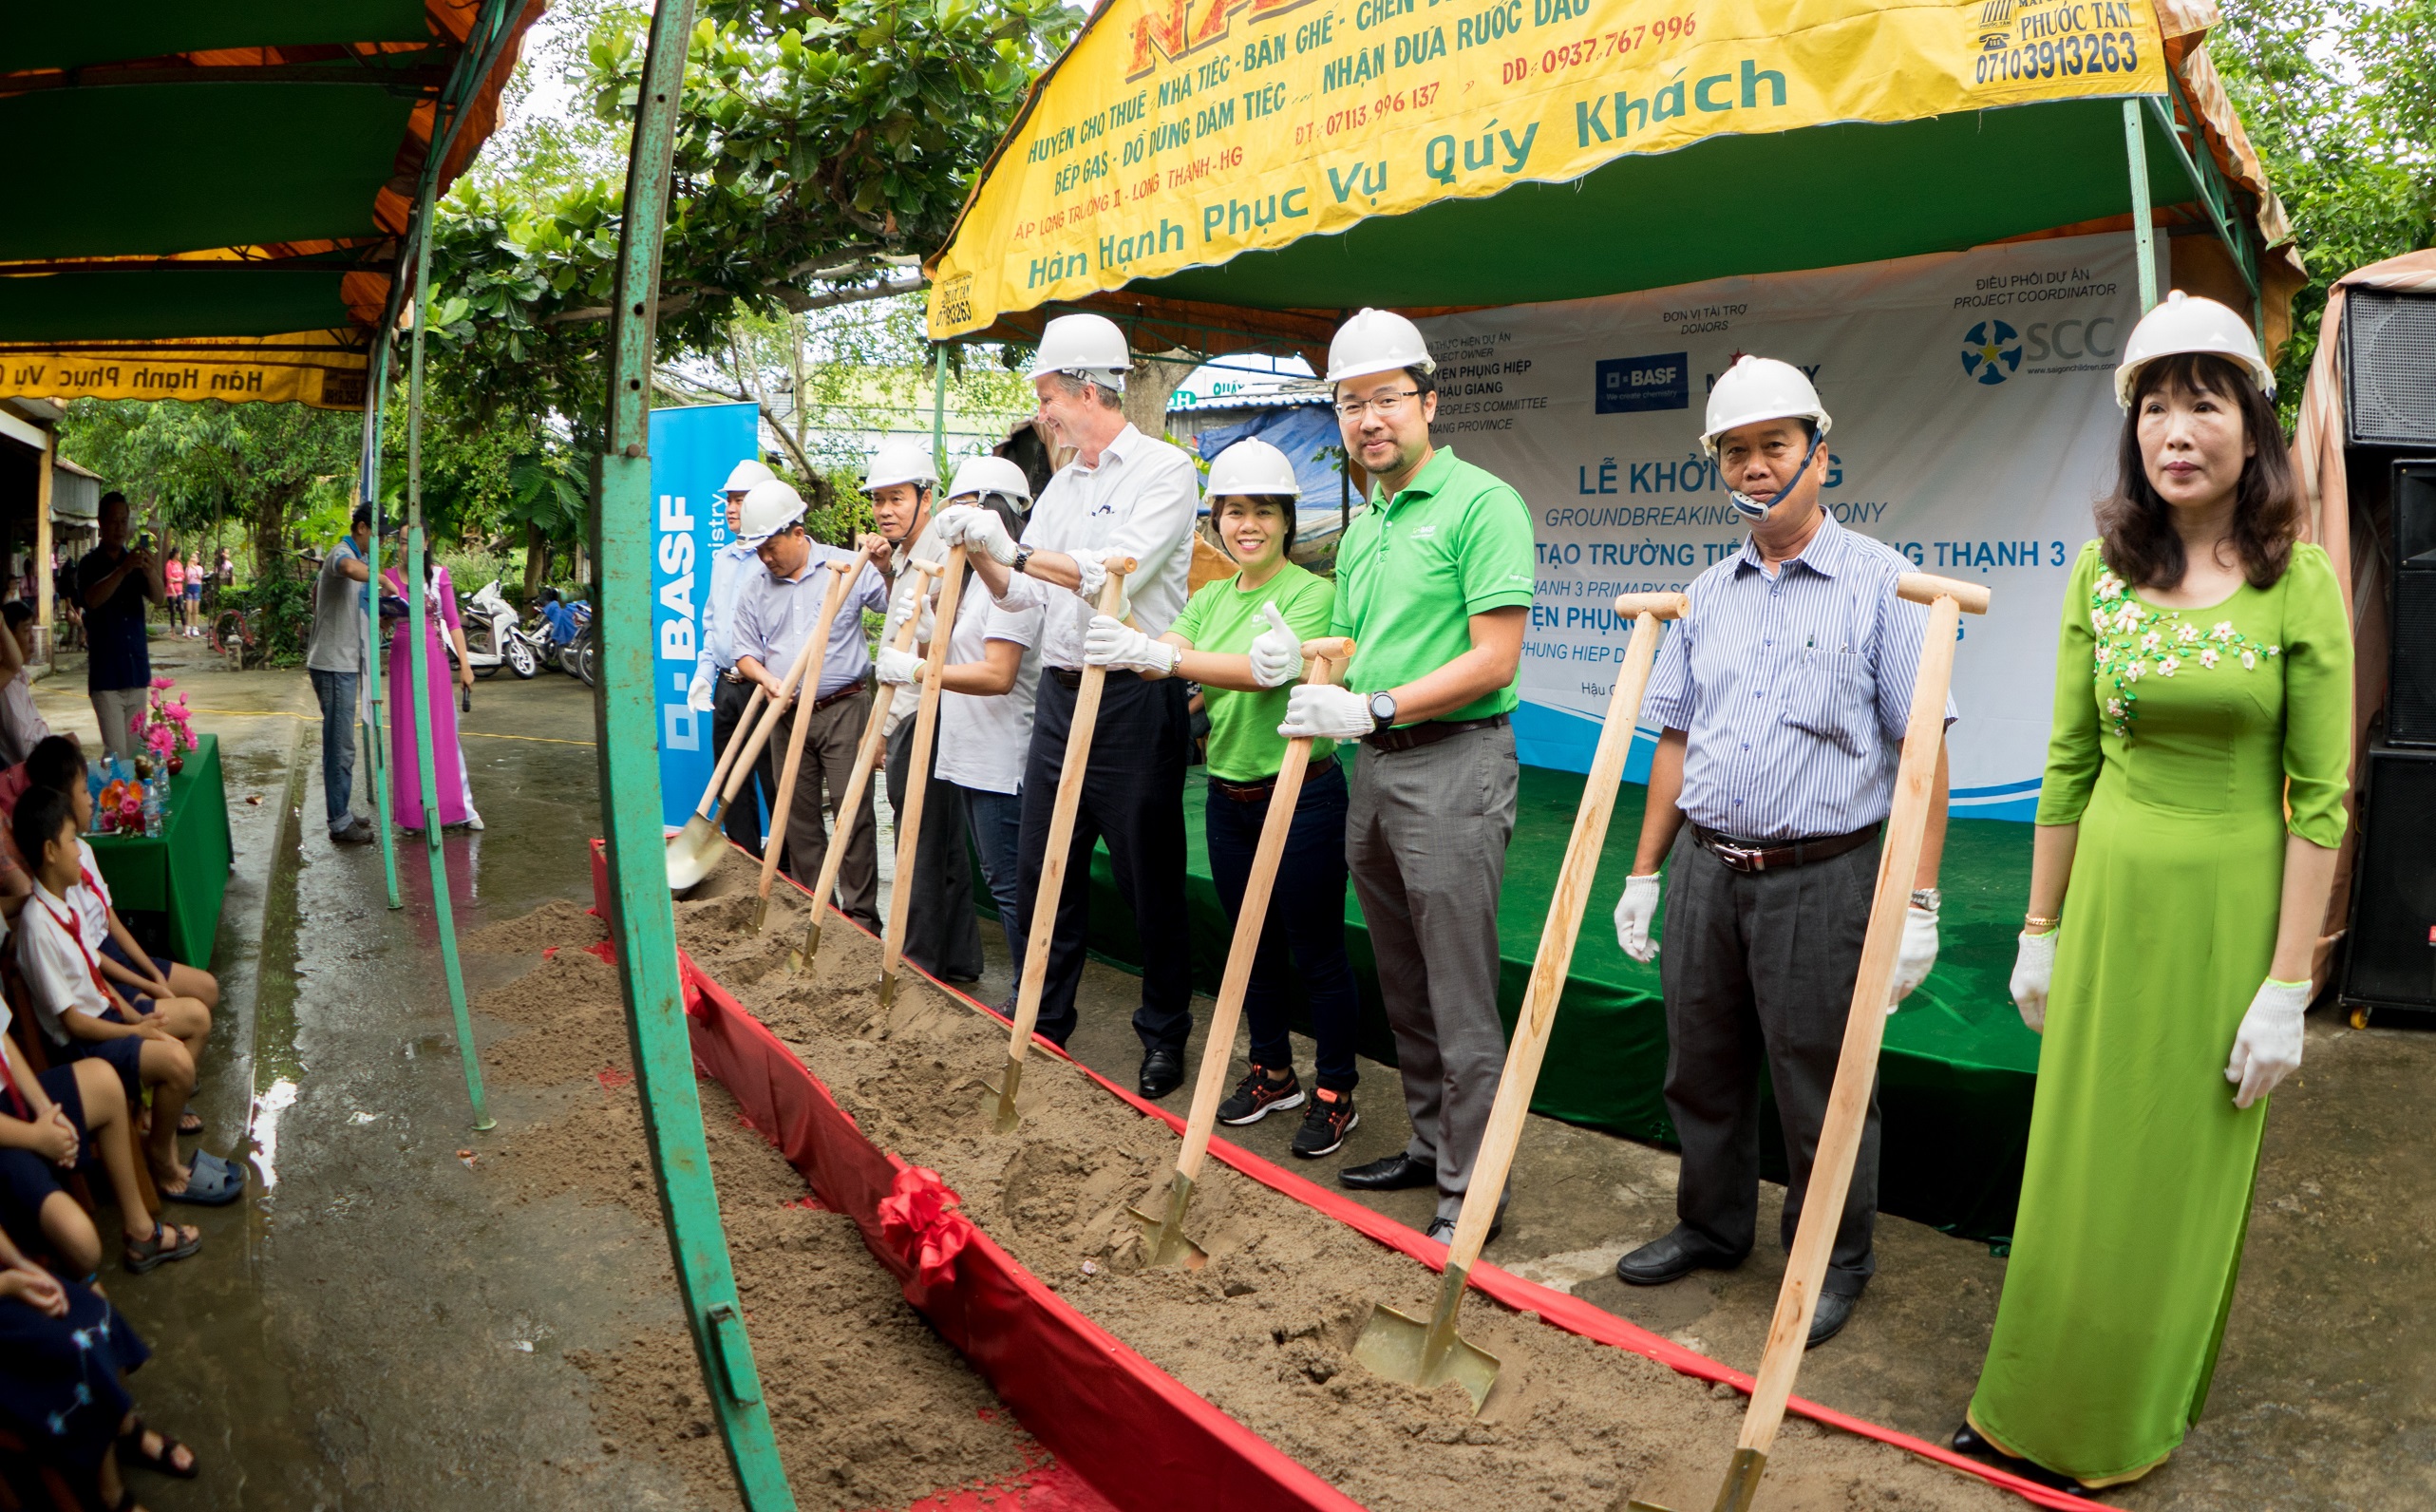 BASF helps improve learning environment in Hau Giang